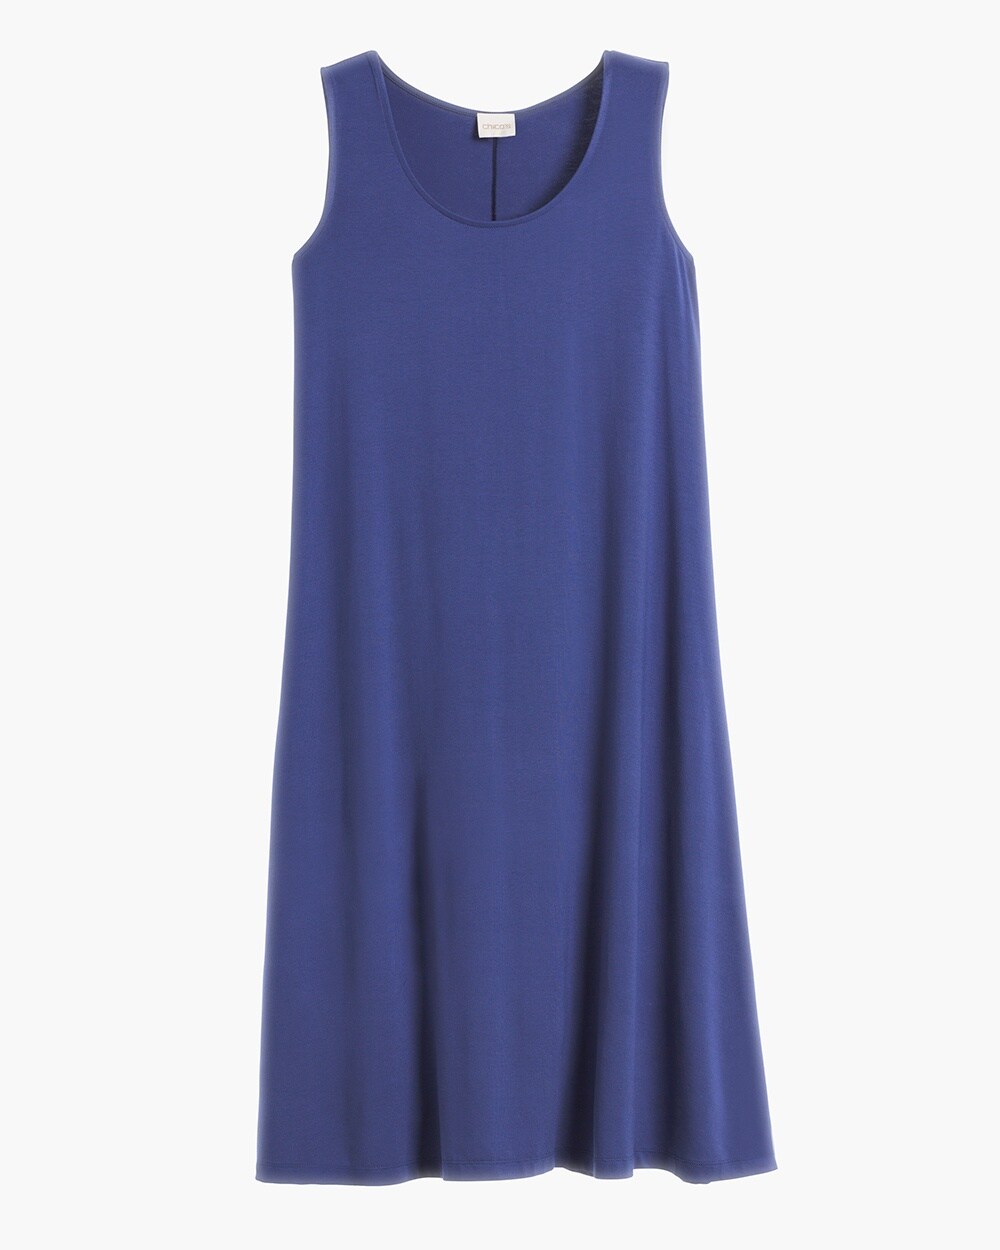 Essential Tee Trapeze Dress - Chico's